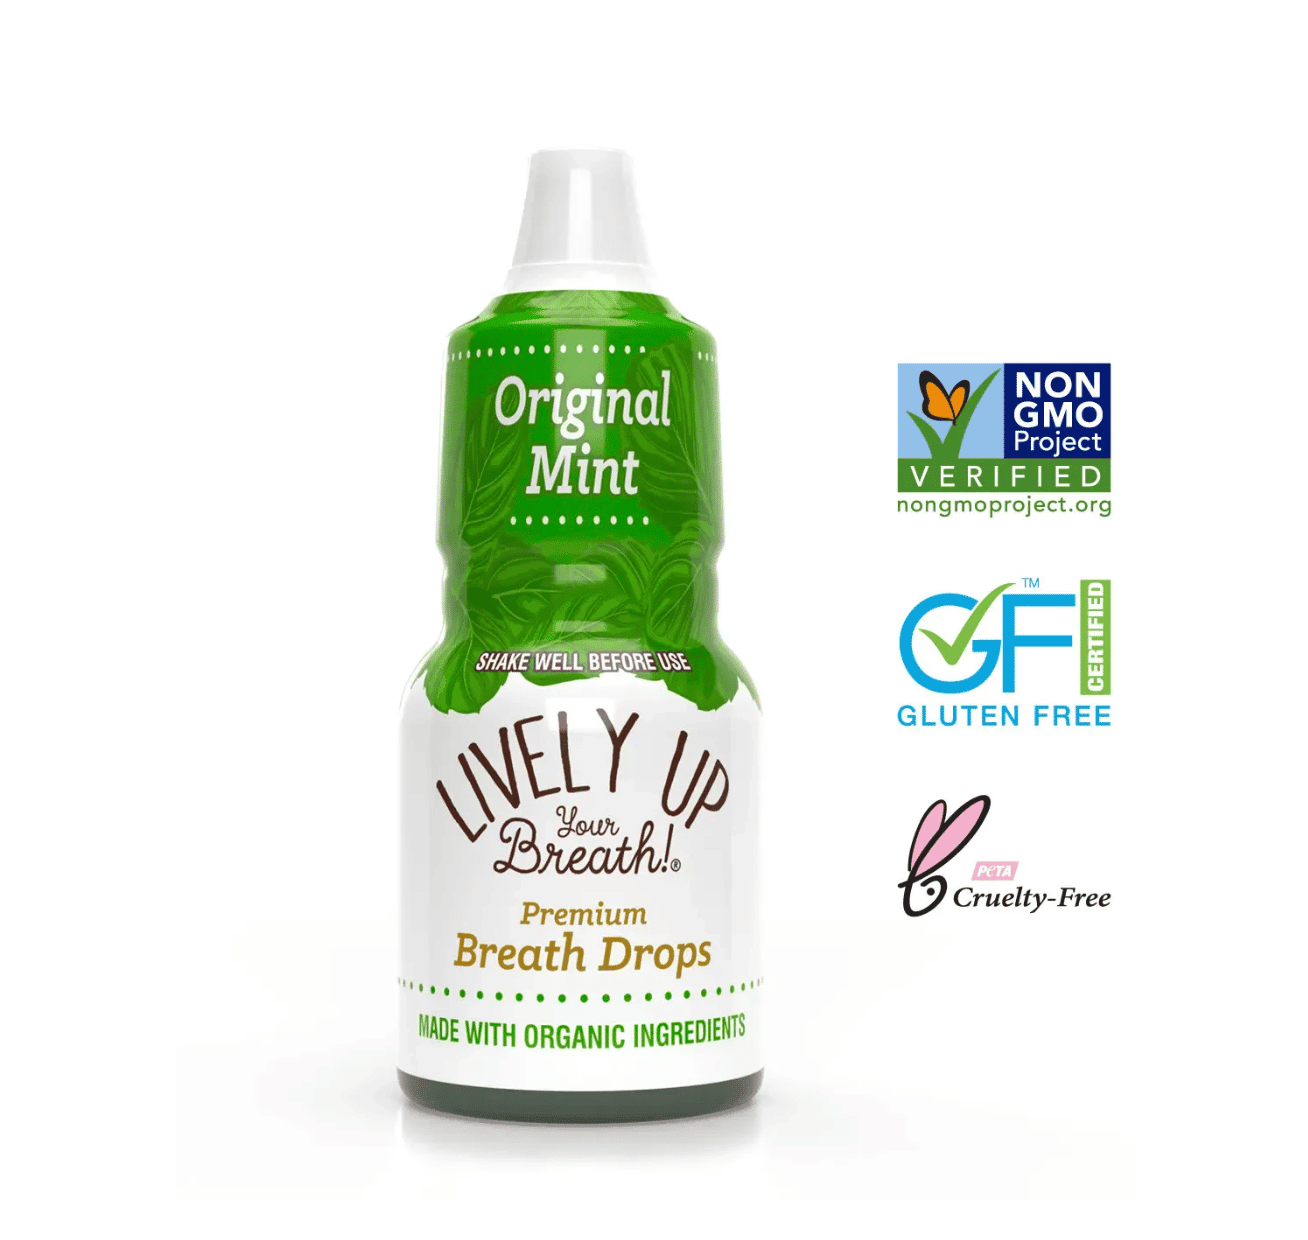 Lively Up Your Breath Organic Mint Liquid Breath Drops